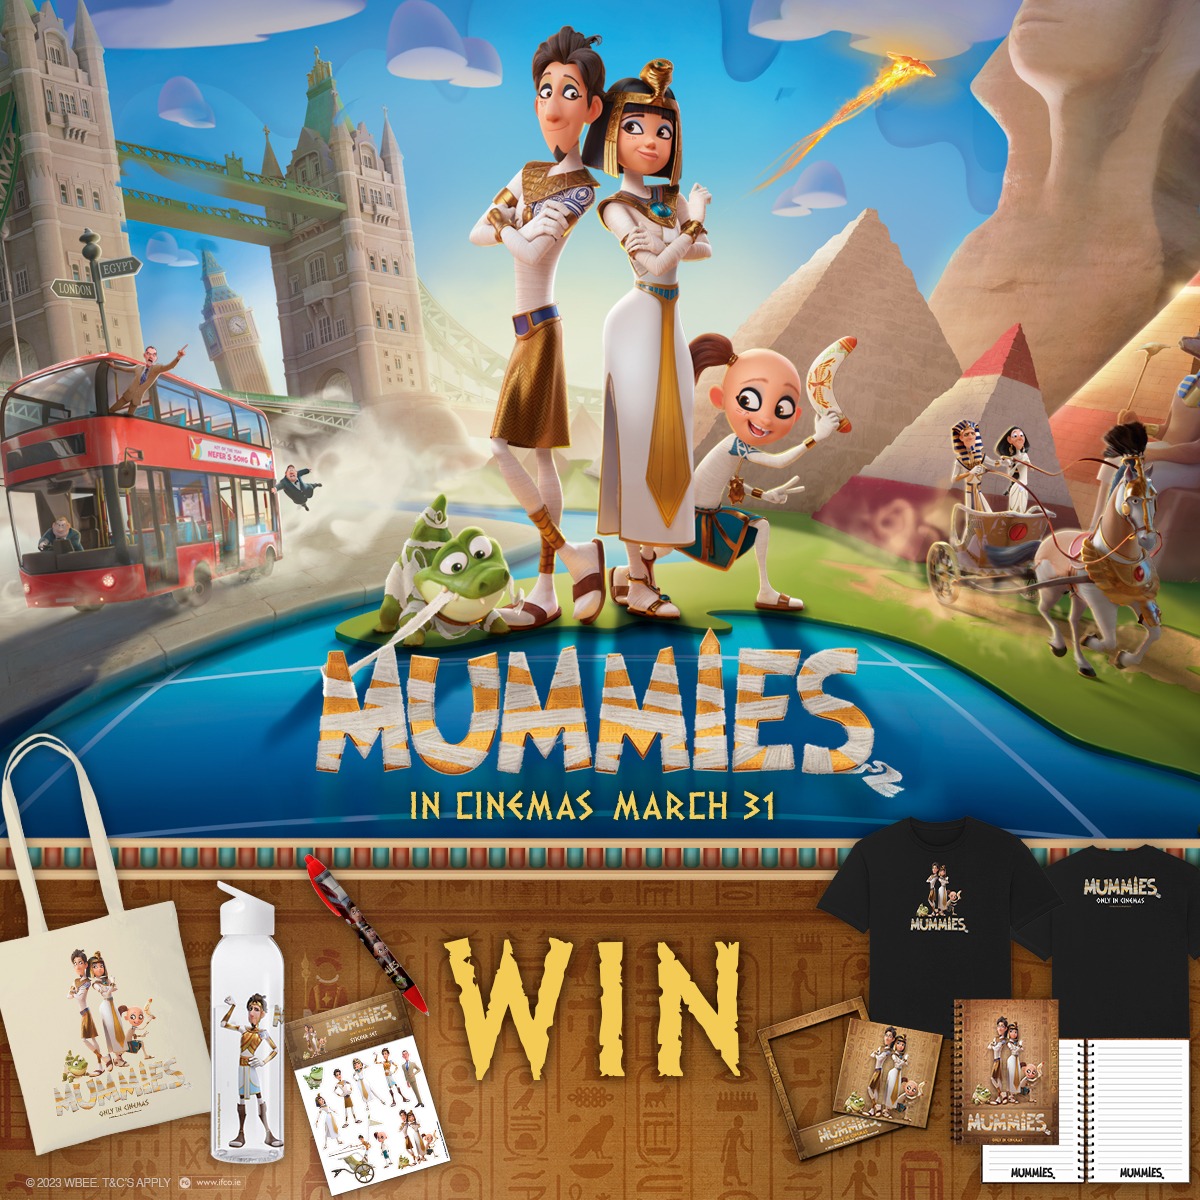 ✨ COMPETITION ✨ To celebrate #MummiesMovie coming to cinemas today, we're giving away an exciting merch bundle! Simply RT this tweet & follow us by April 28 to be in with a chance to #WIN!